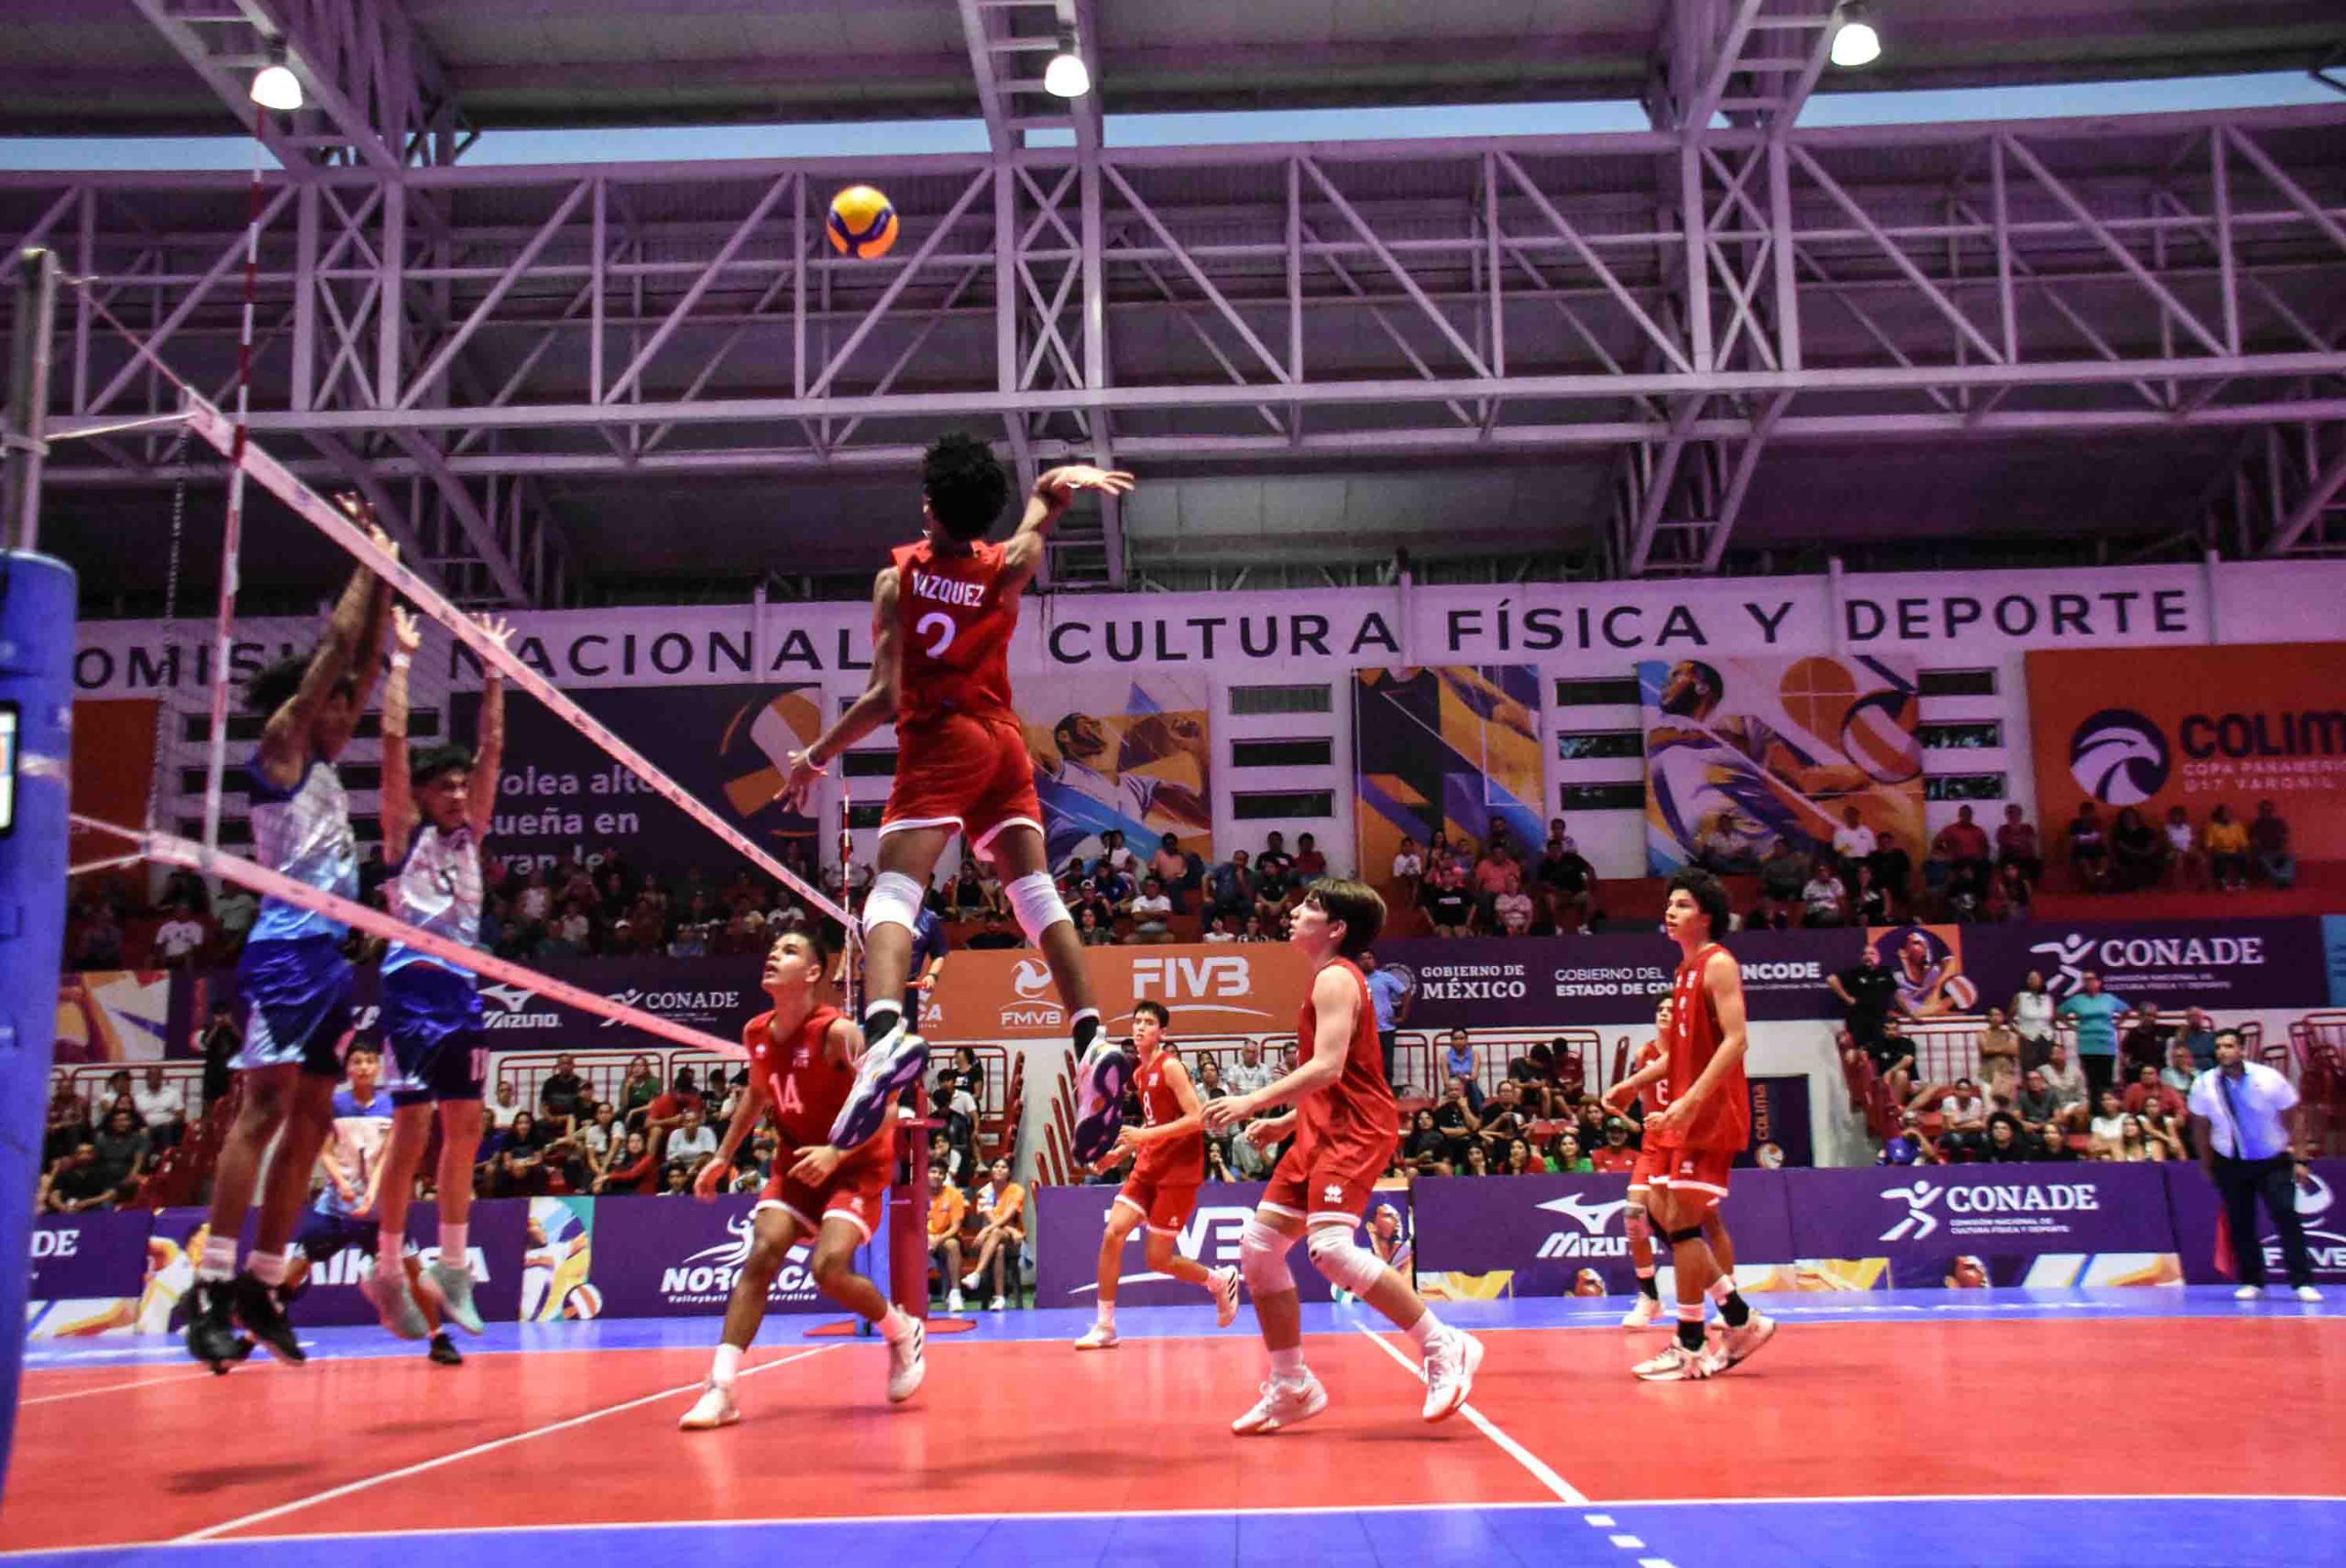 Puerto Rico Defeats Nicaragua in their Opening Match